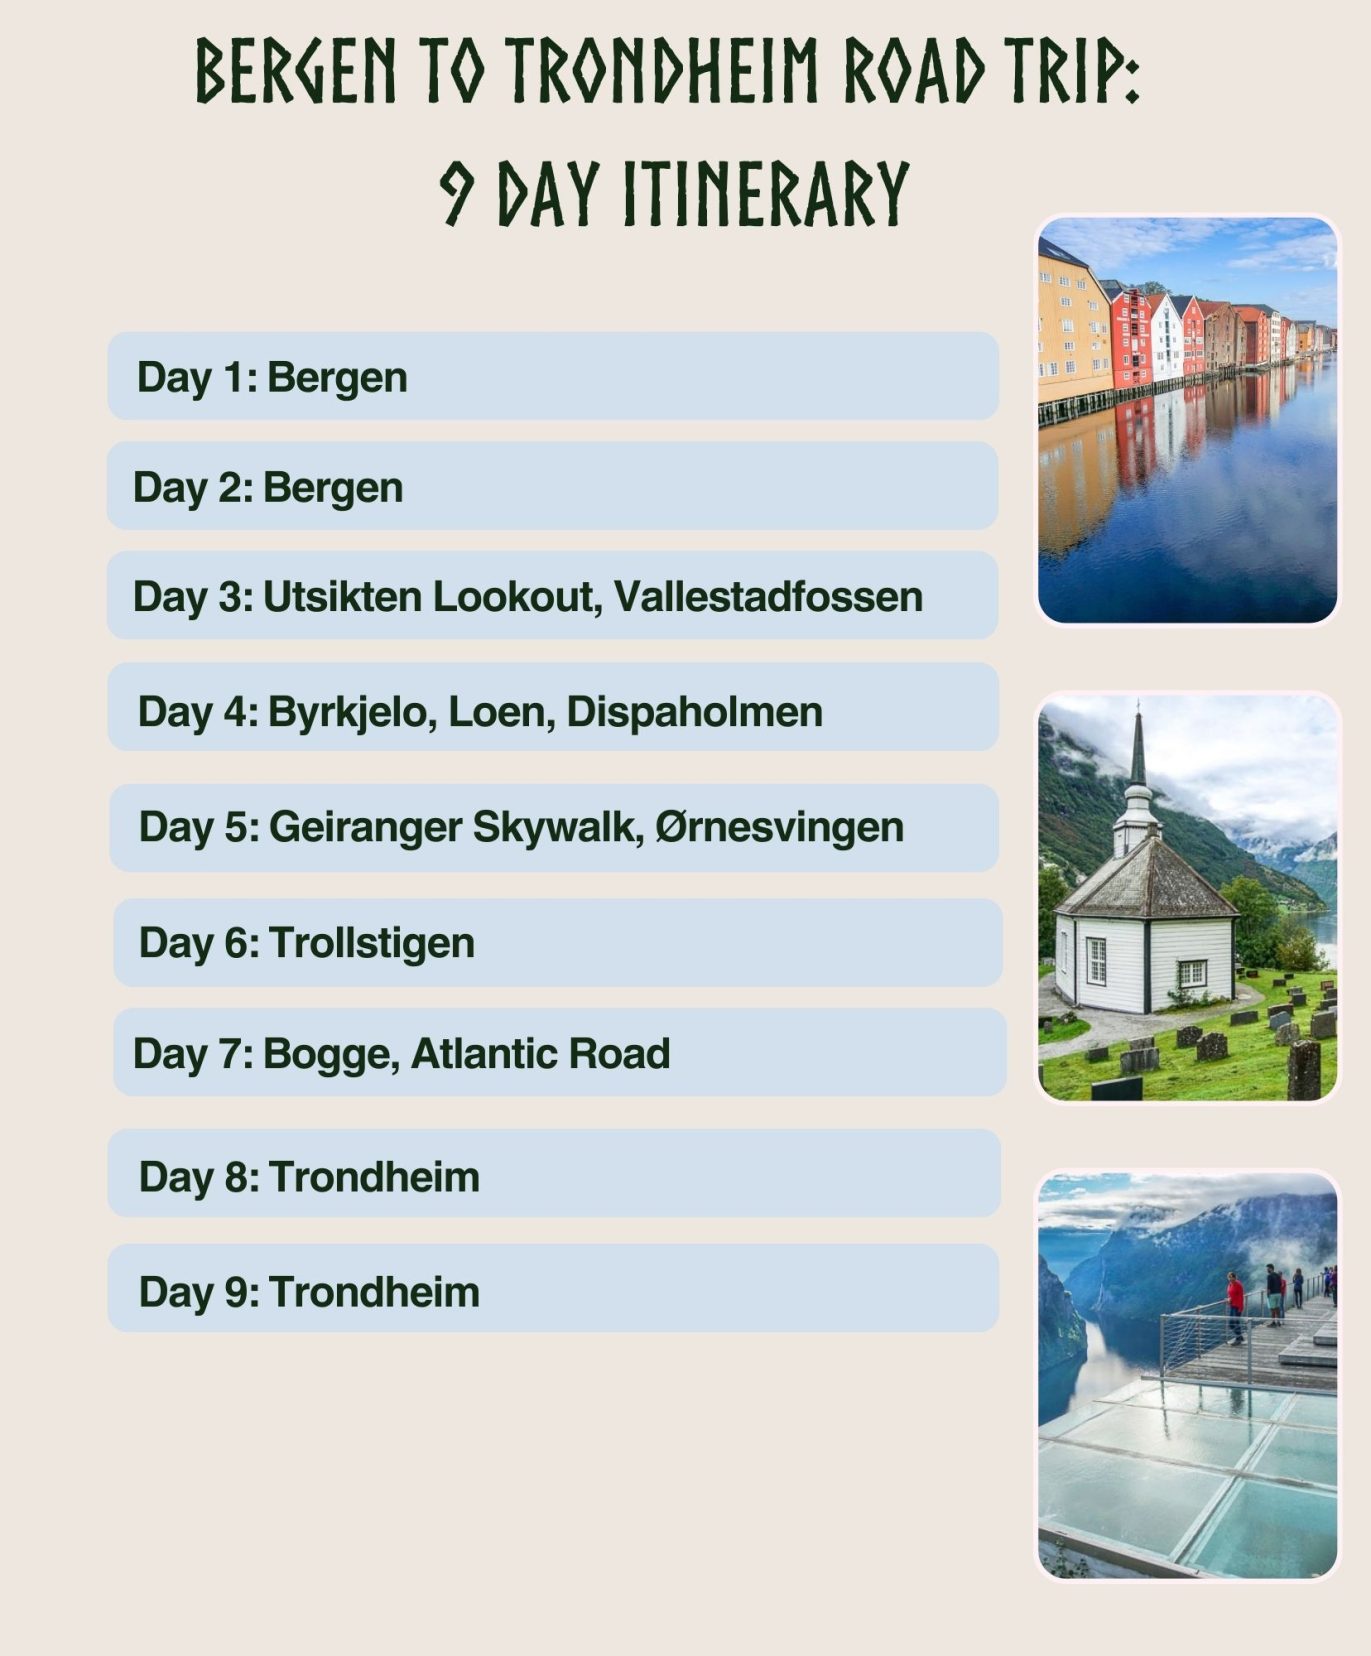 Bergen to Trondheim road trip 9 day itinerary